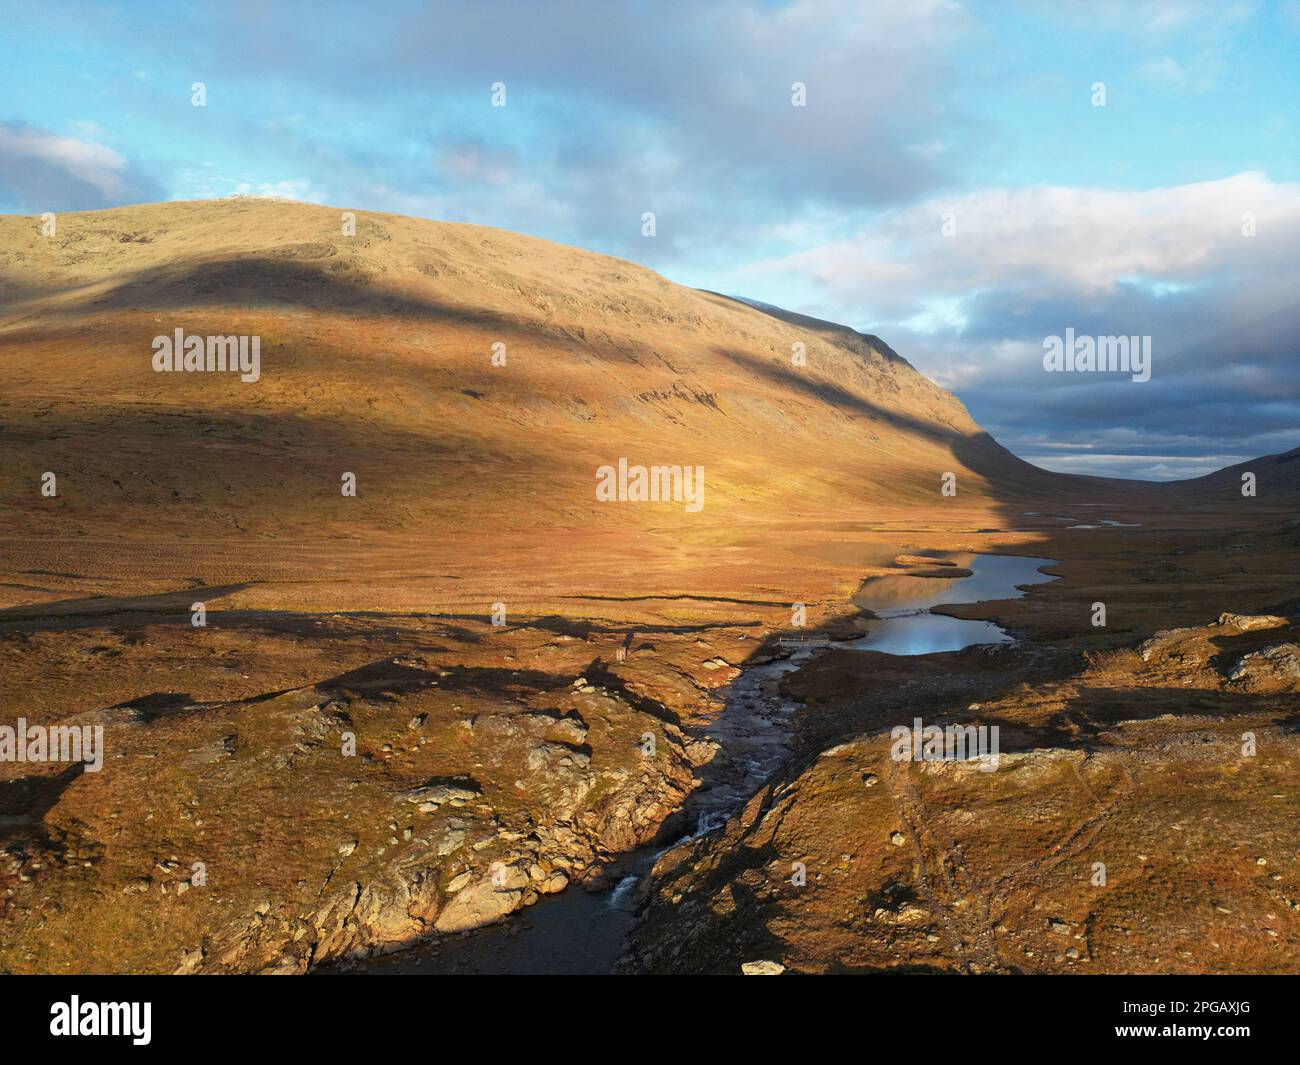 An aerial panorama of the hiking trail between Viterskalet and Syter Mountain Huts, October, Swedish Lapland Stock Photo